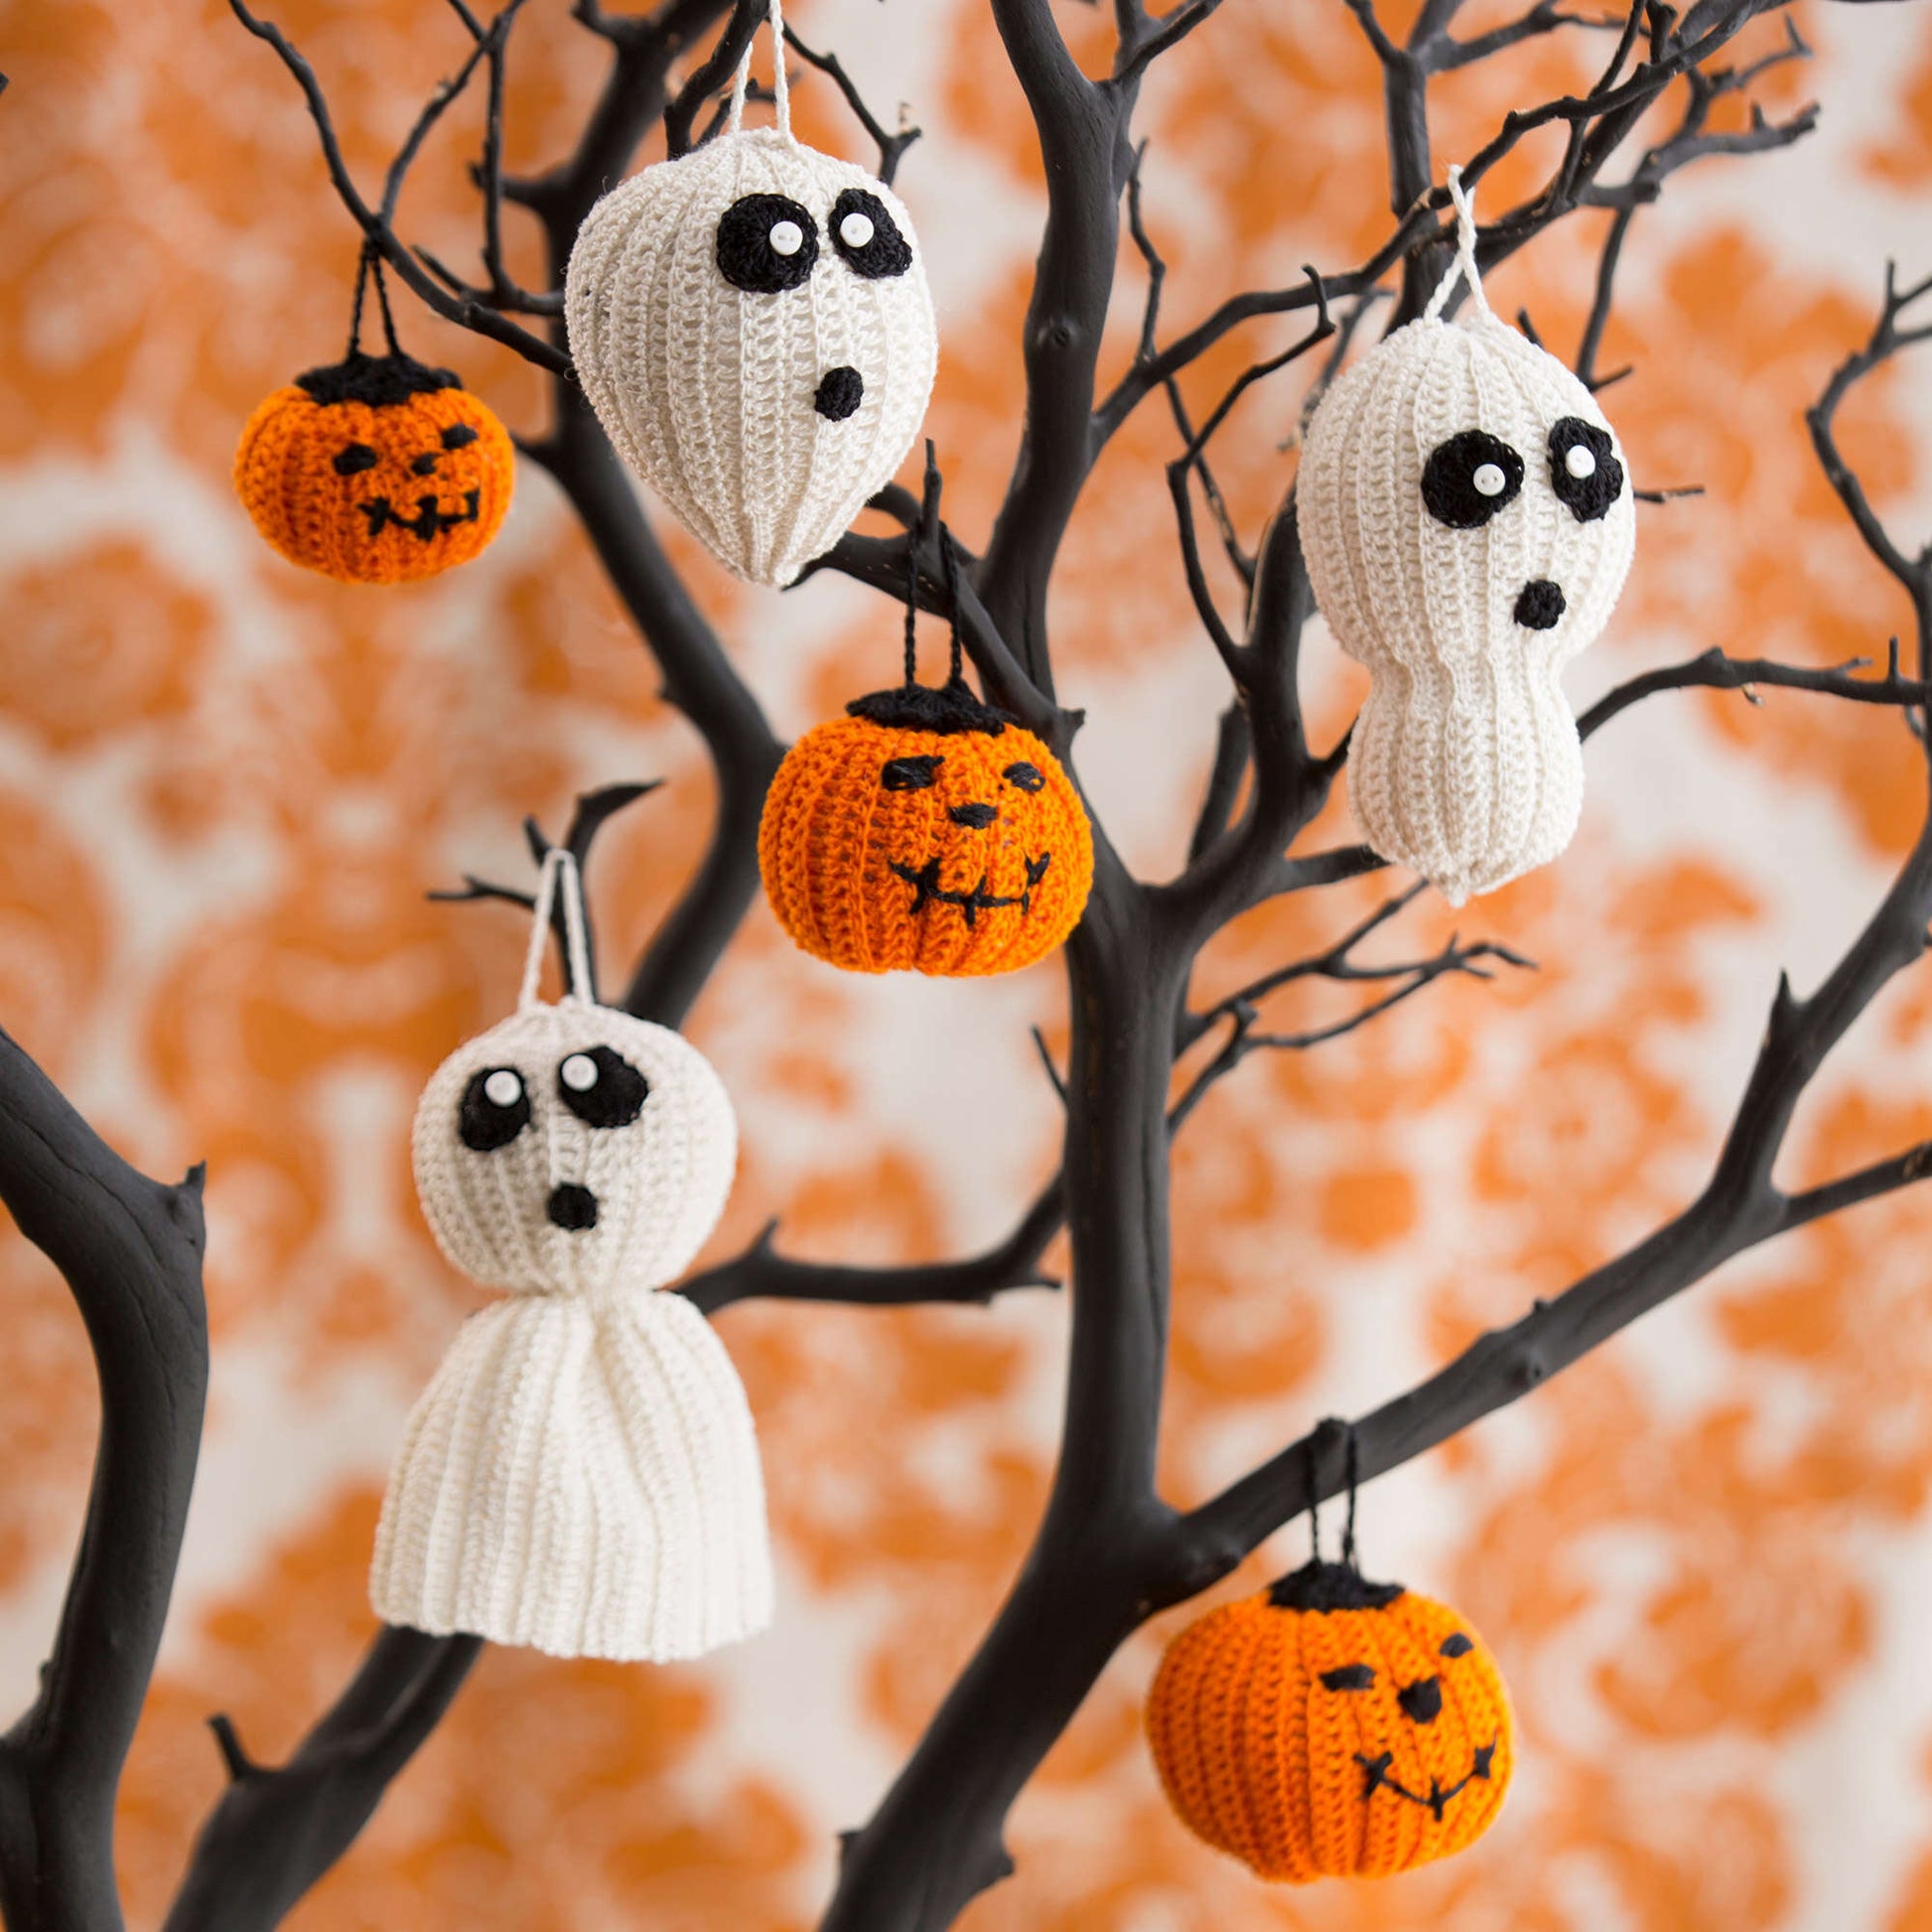 Aunt Lydia's Halloween Tree of Spookiness Crochet Interior Décor made in Aunt Lydia's Classic Crochet Thread yarn